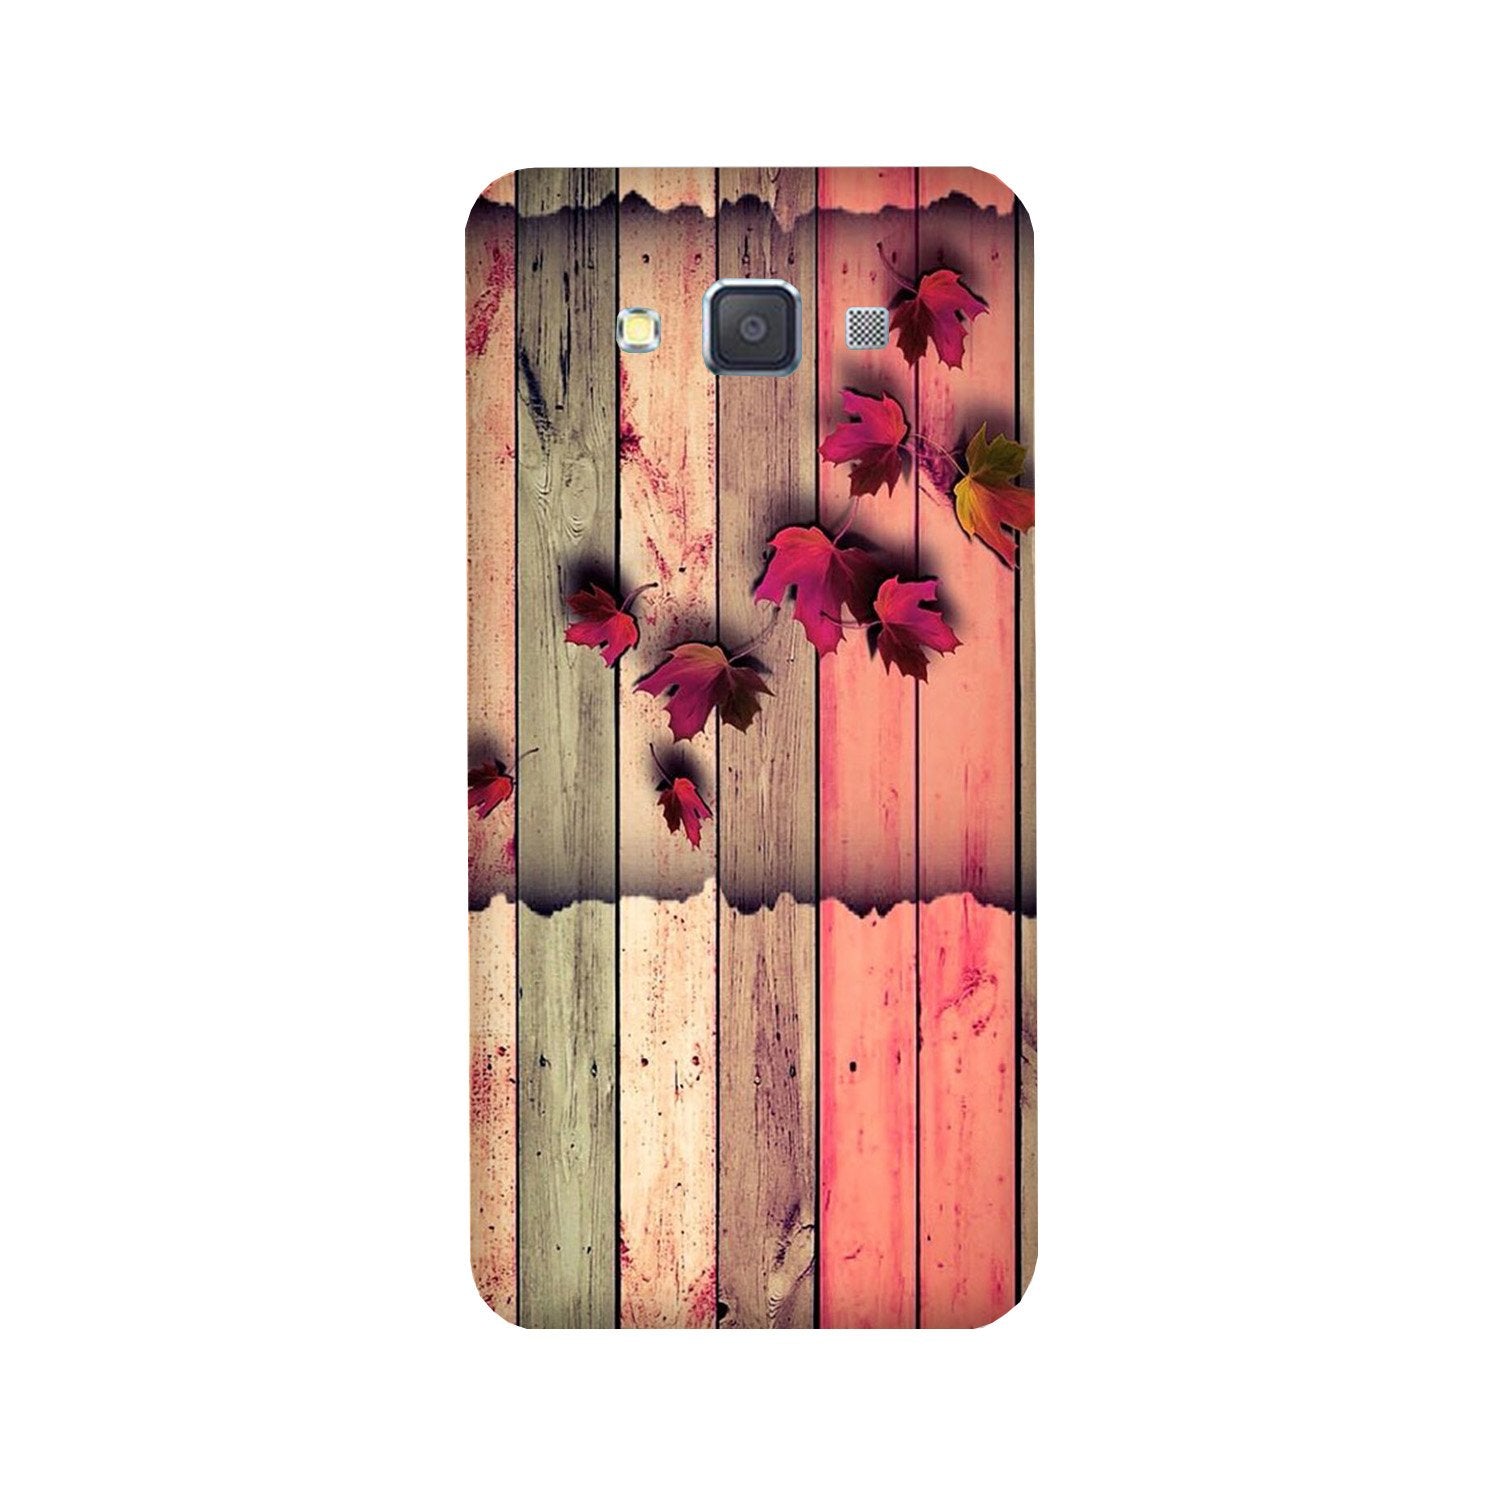 Wooden look2 Case for Galaxy E7